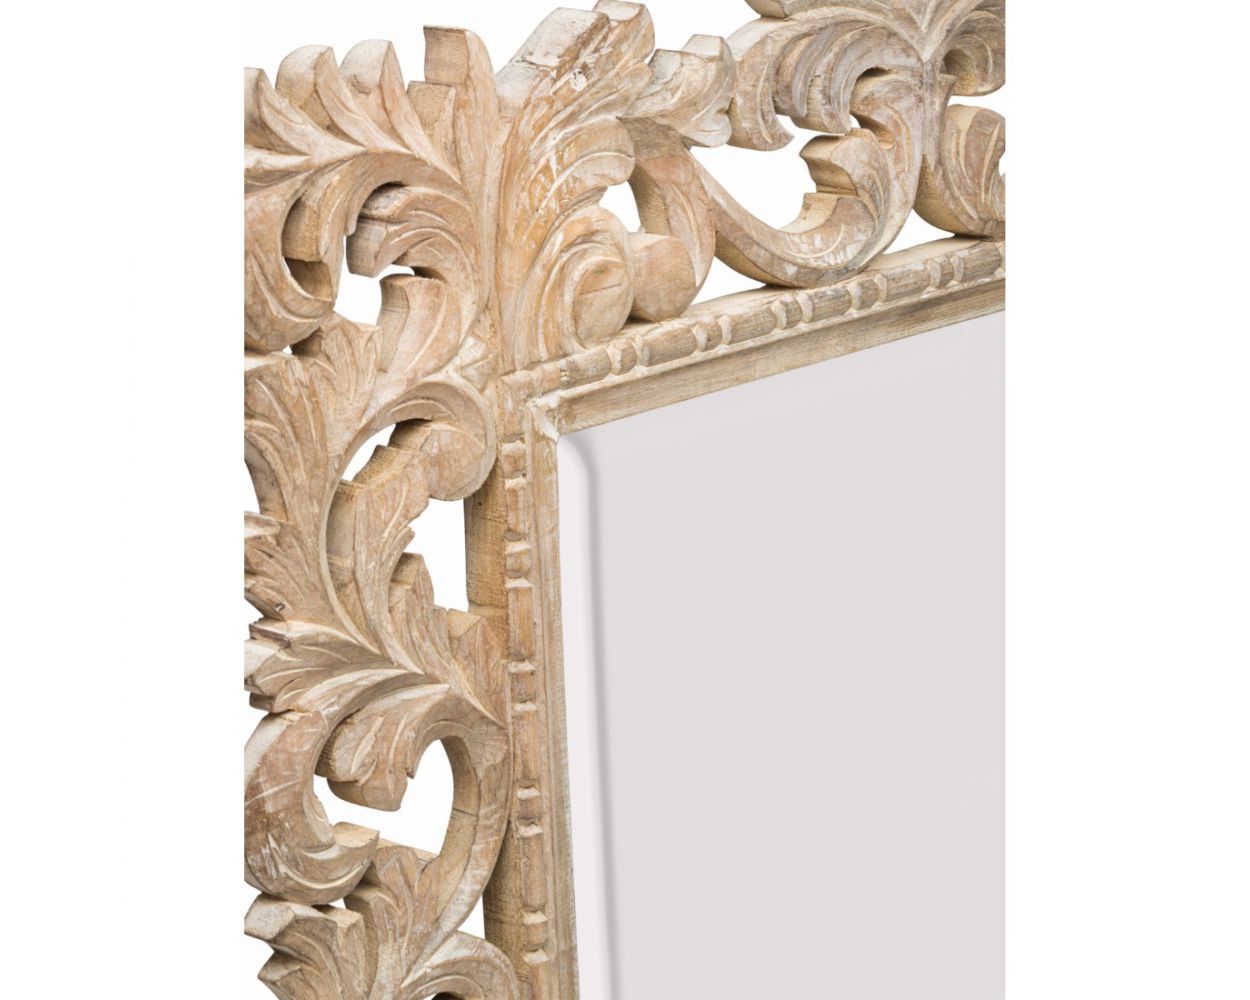 Wall Mirror Rustic Hand Carved Hallway, Large Wooden Wall Mirror Au